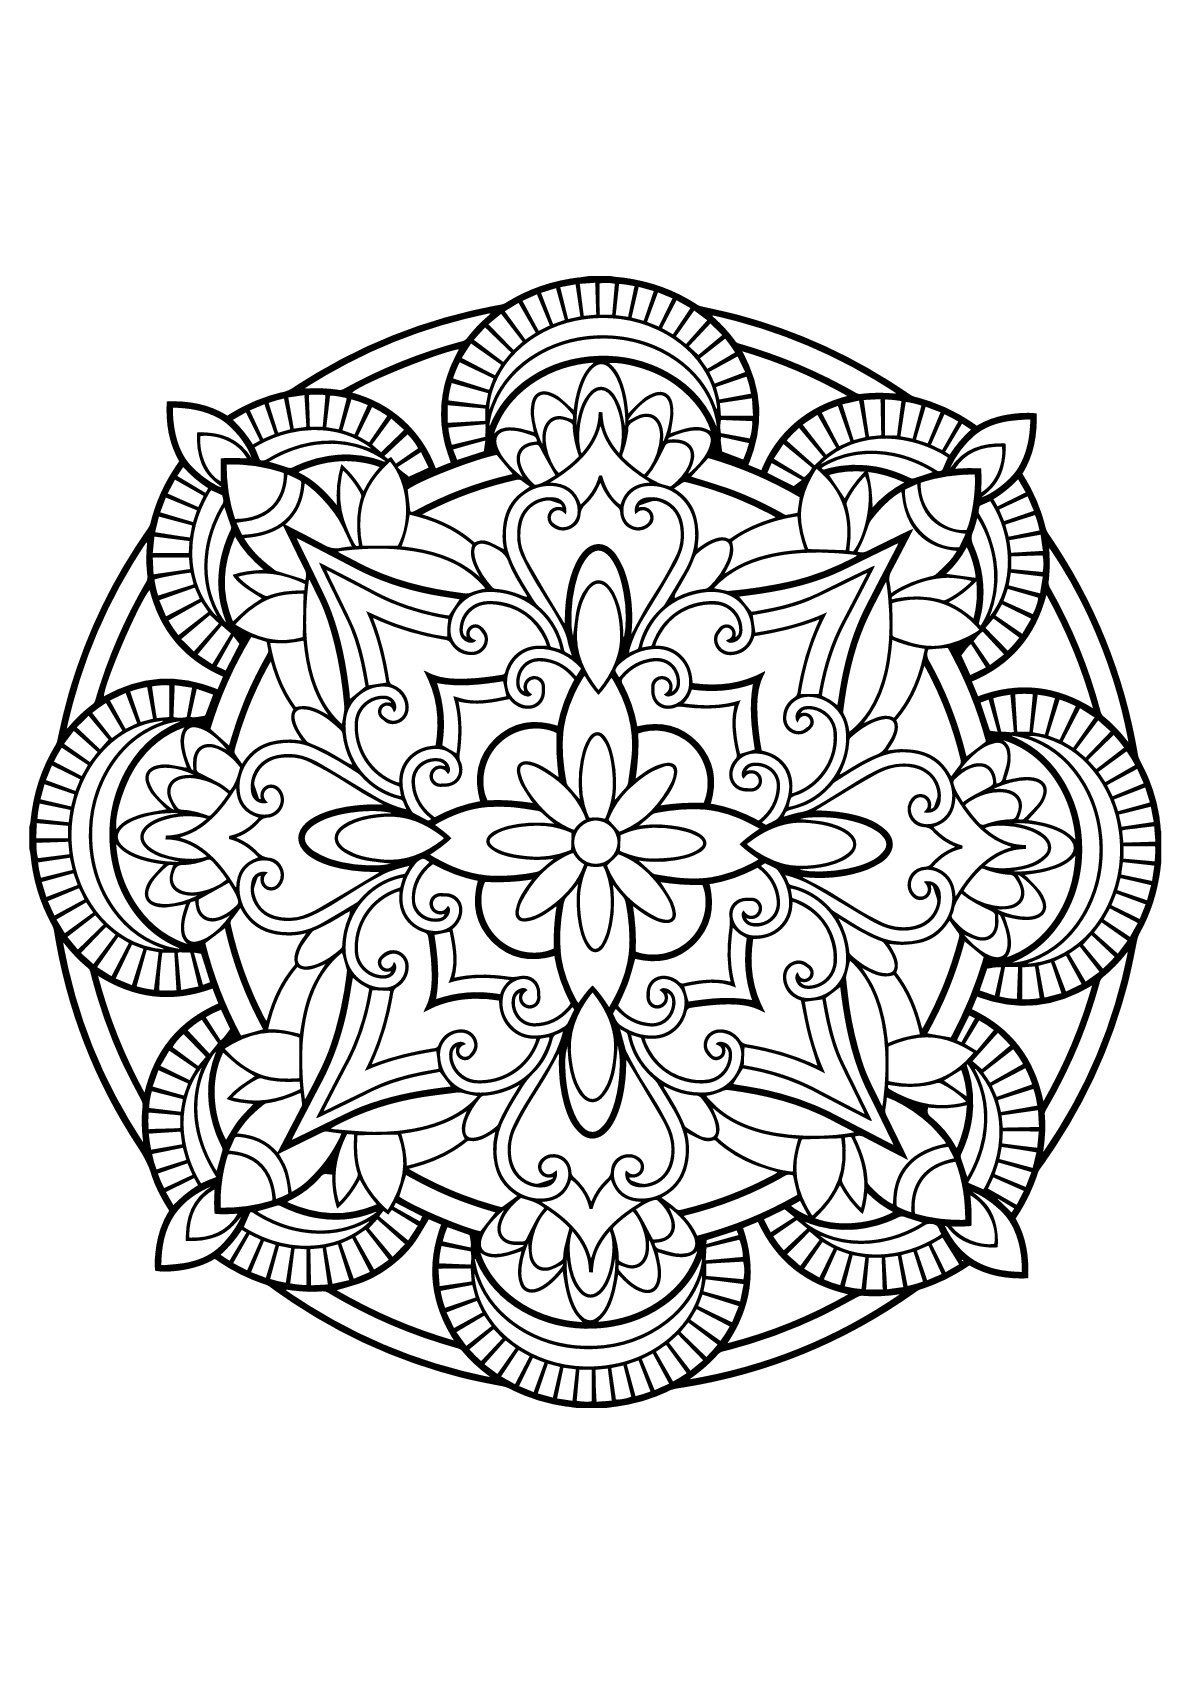 Mandala from free coloring books for adults 23 - Mandalas Adult Coloring  Pages